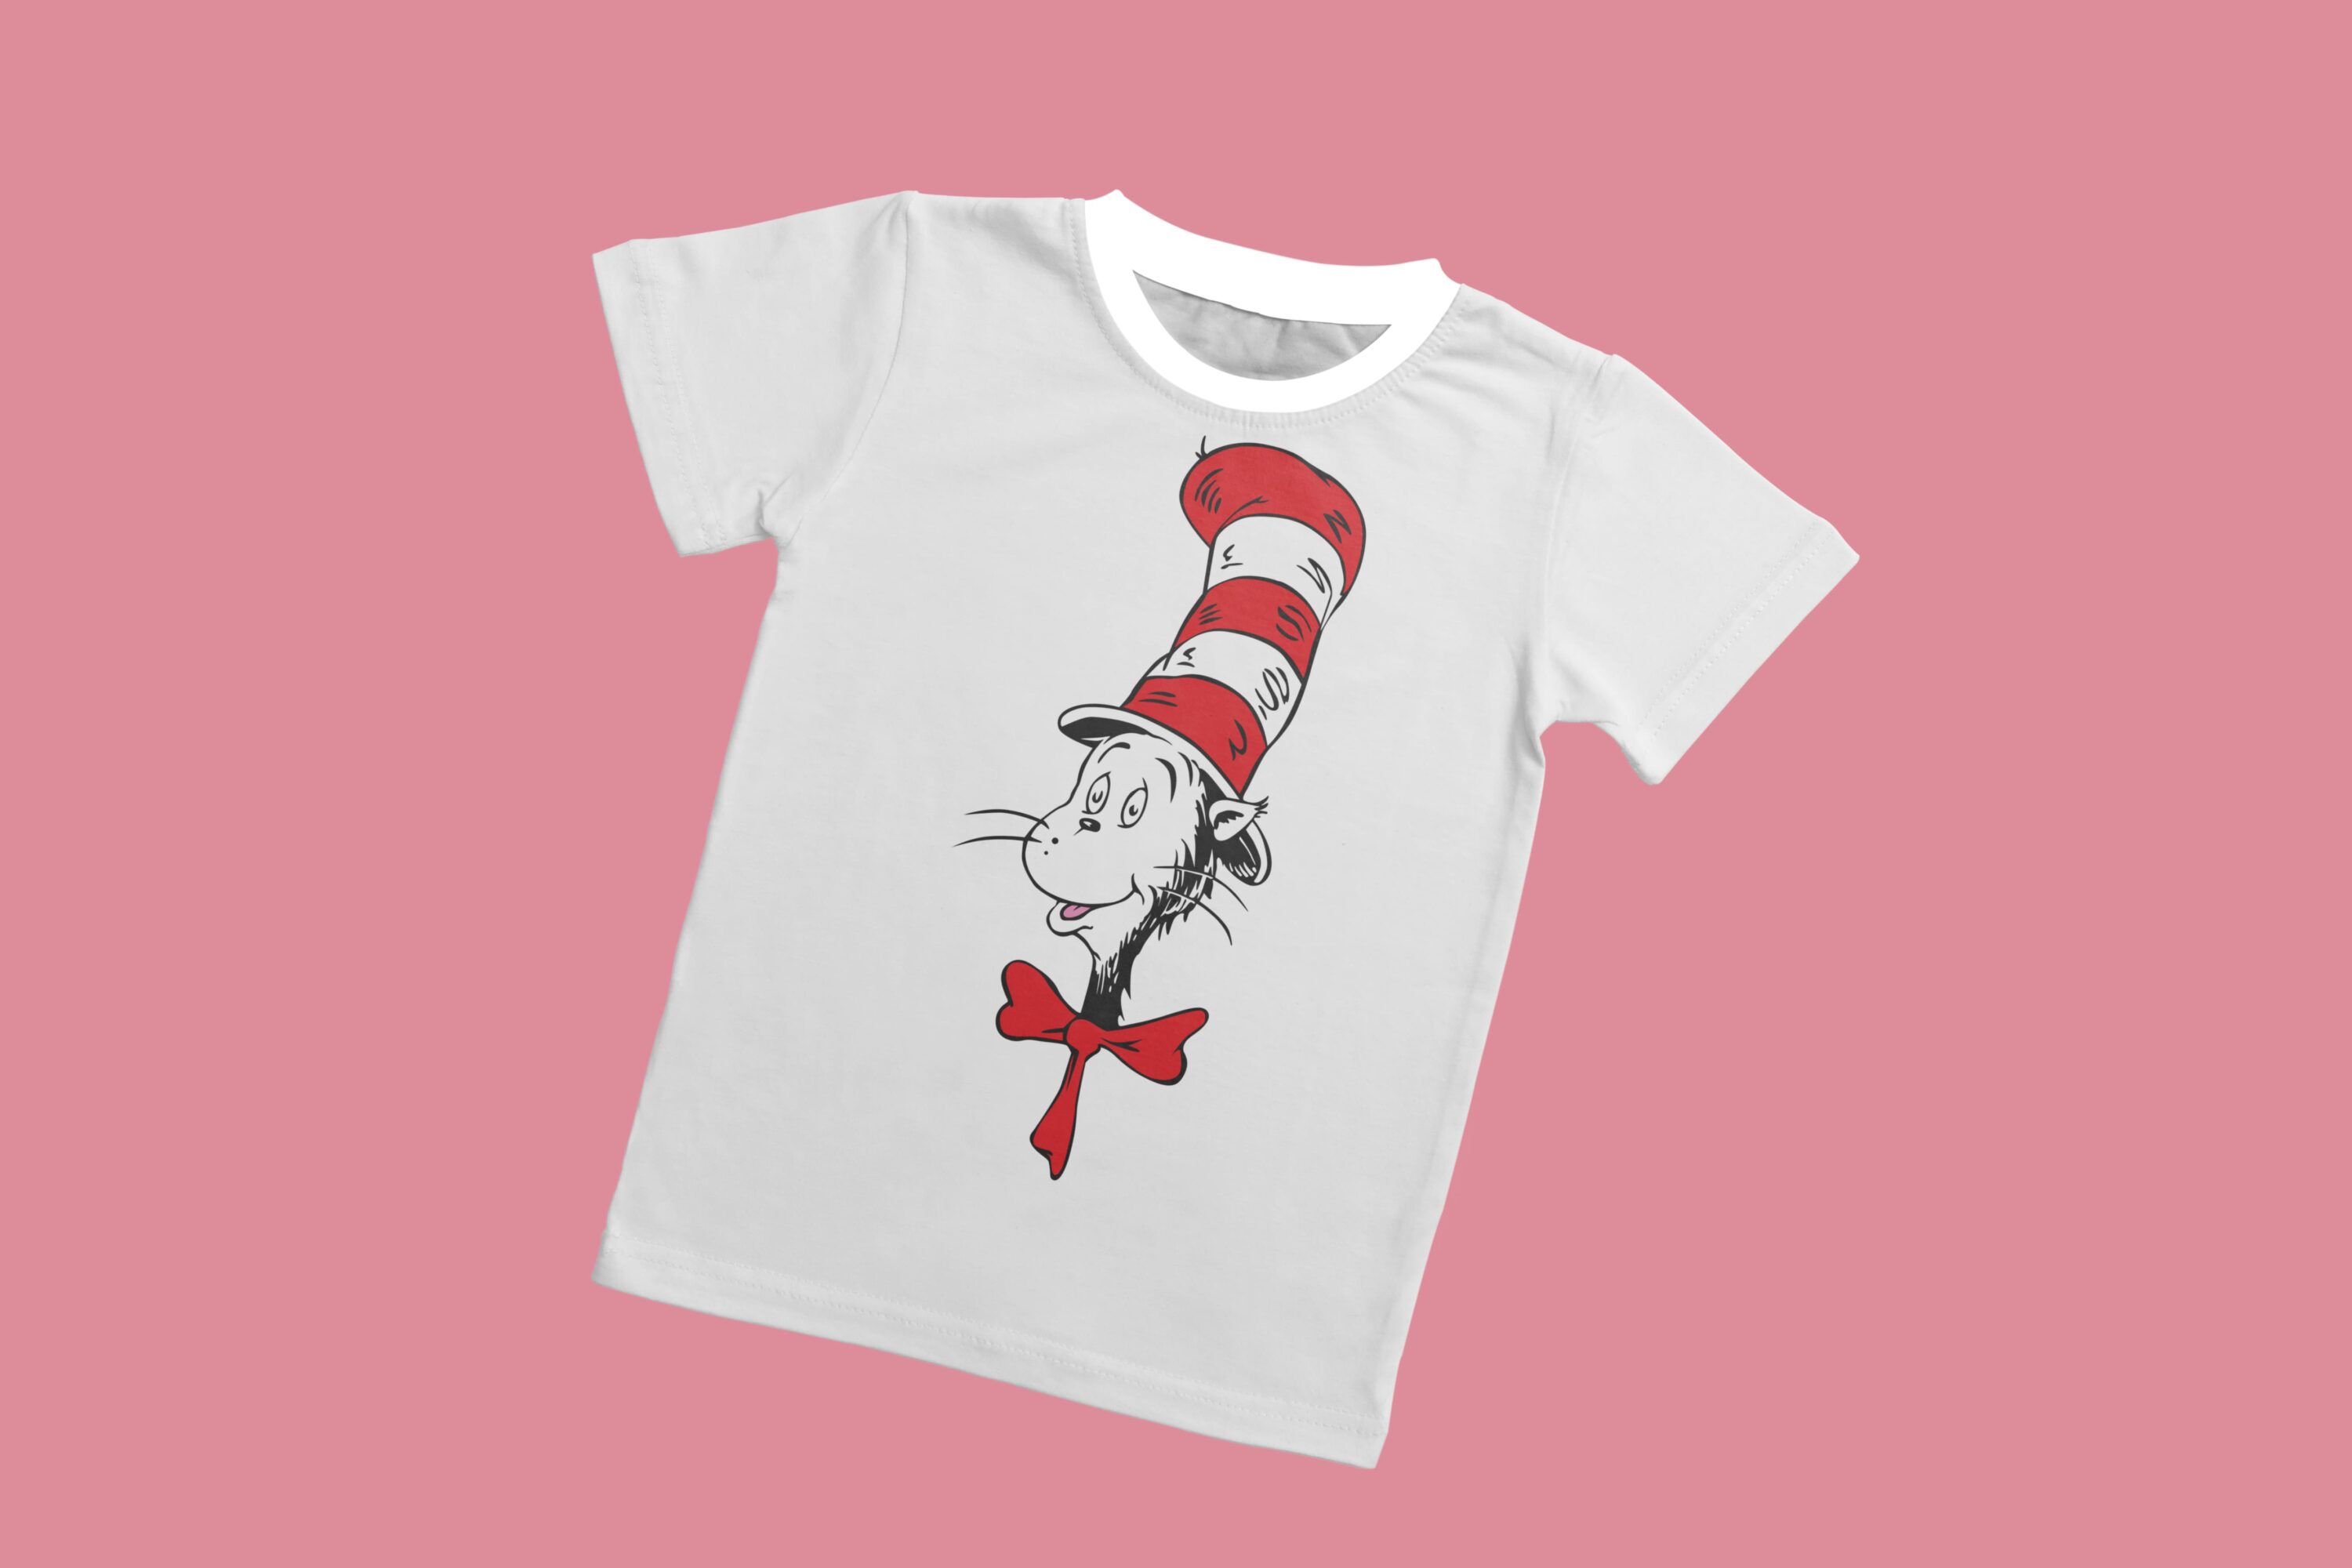 A gray t-shirt with a white collar and the face of a surprised cat with a red bow in a red and white hat.